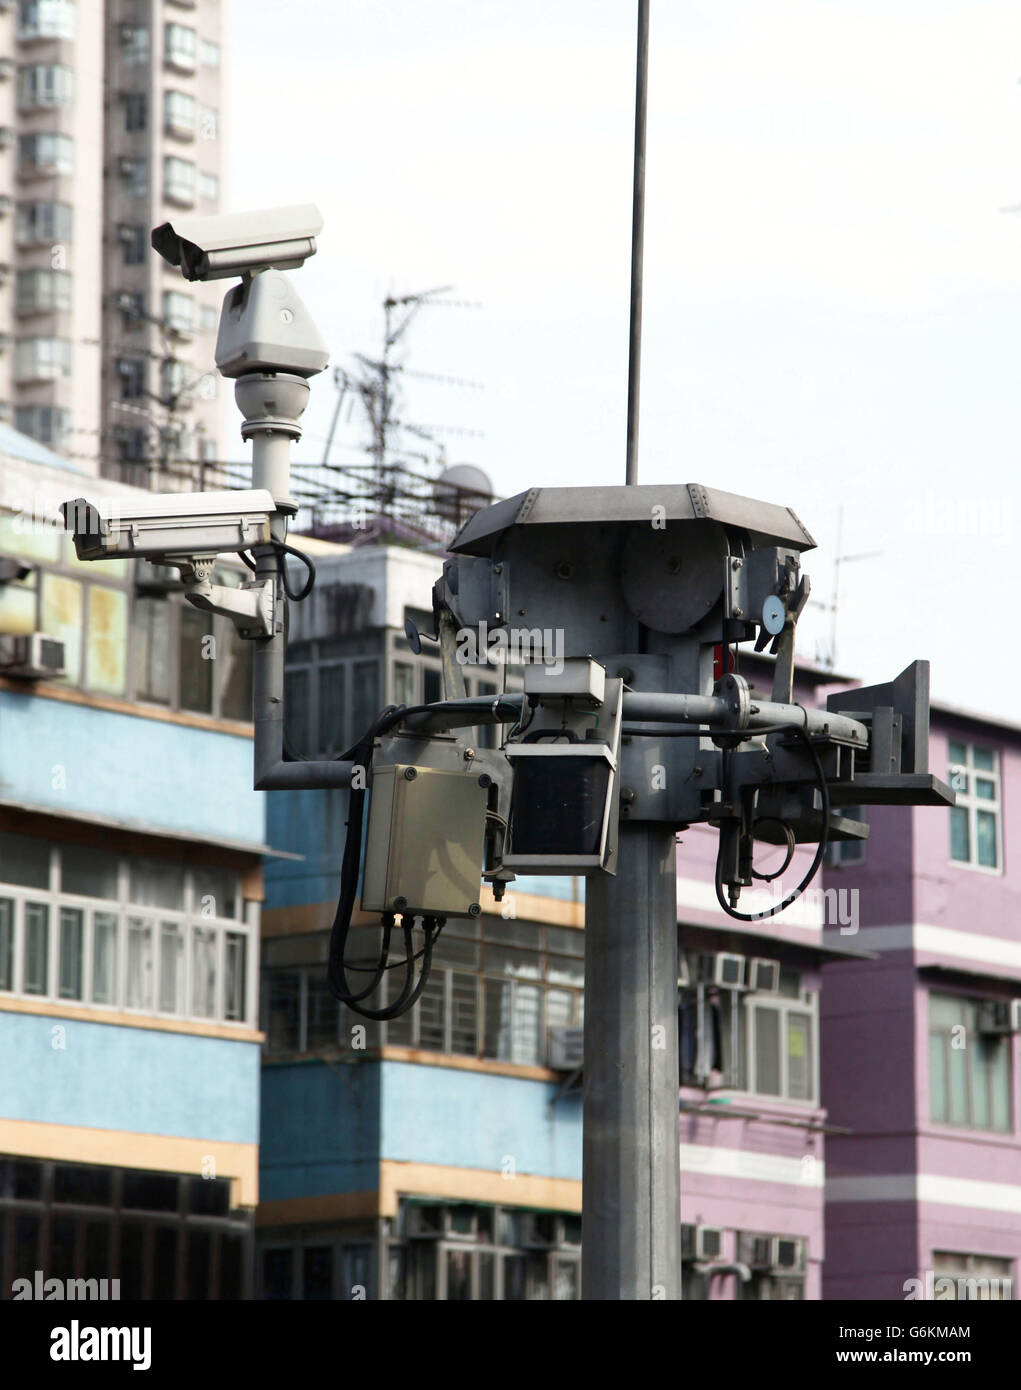 It's a photo of CCTV cameras in the street of Hong Kong Stock Photo